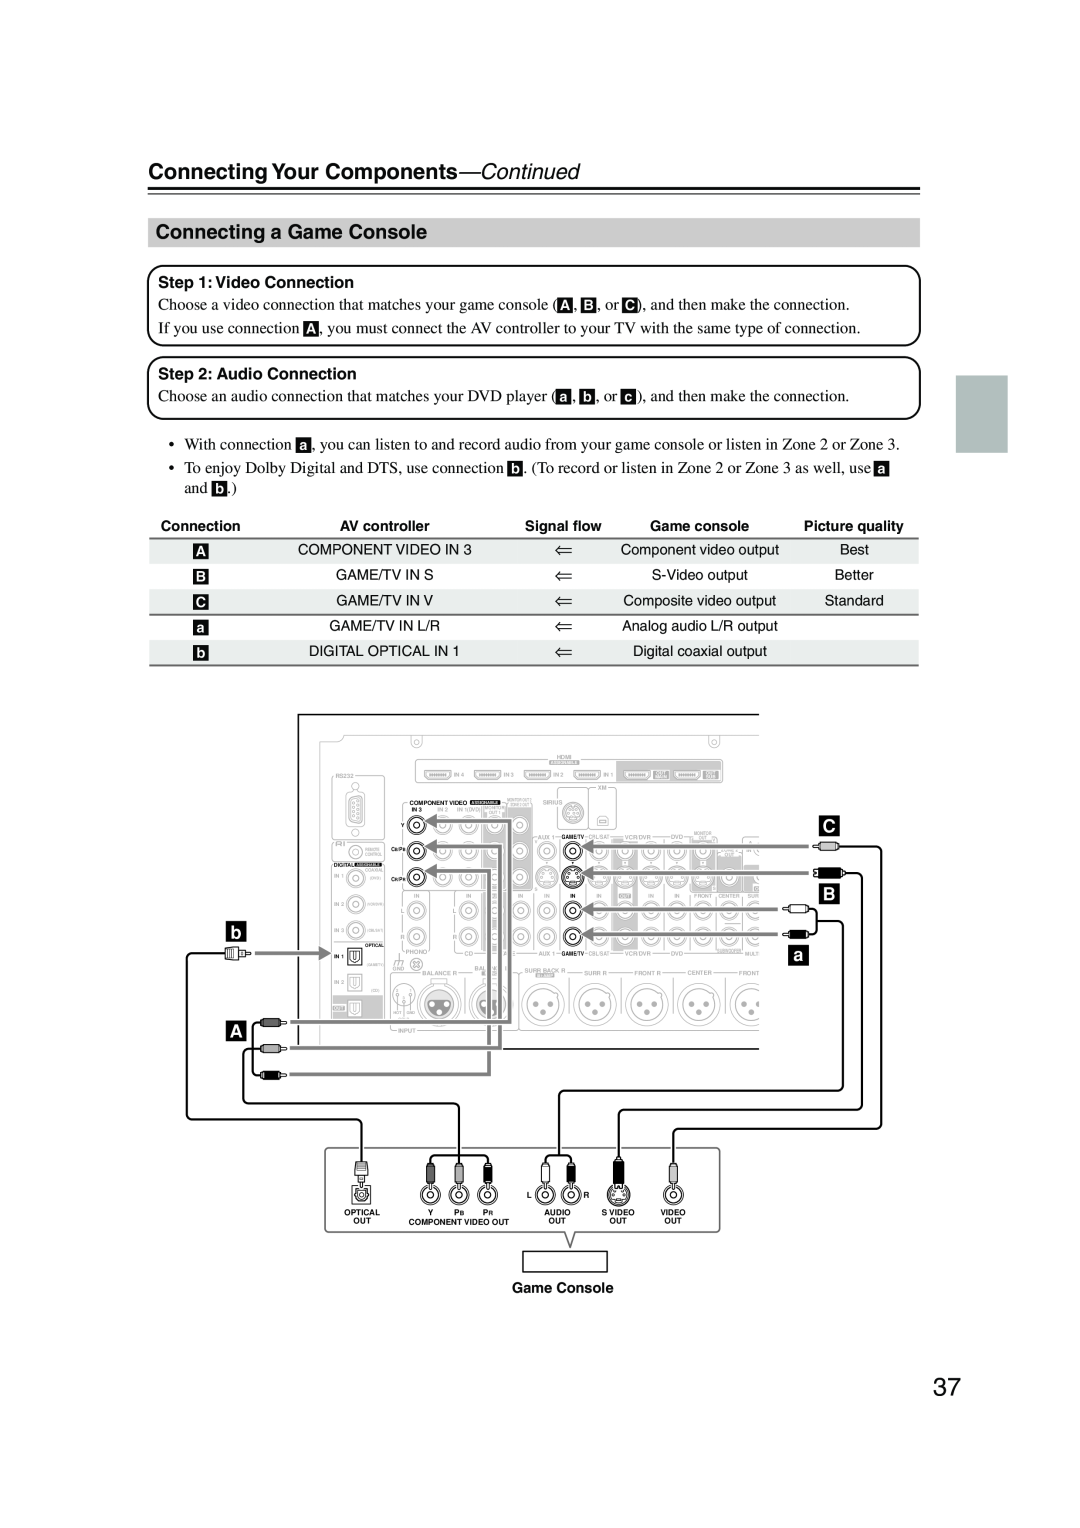 Onkyo PR-SC885 instruction manual Connecting a Game Console, Connecting Your Components—Continued 